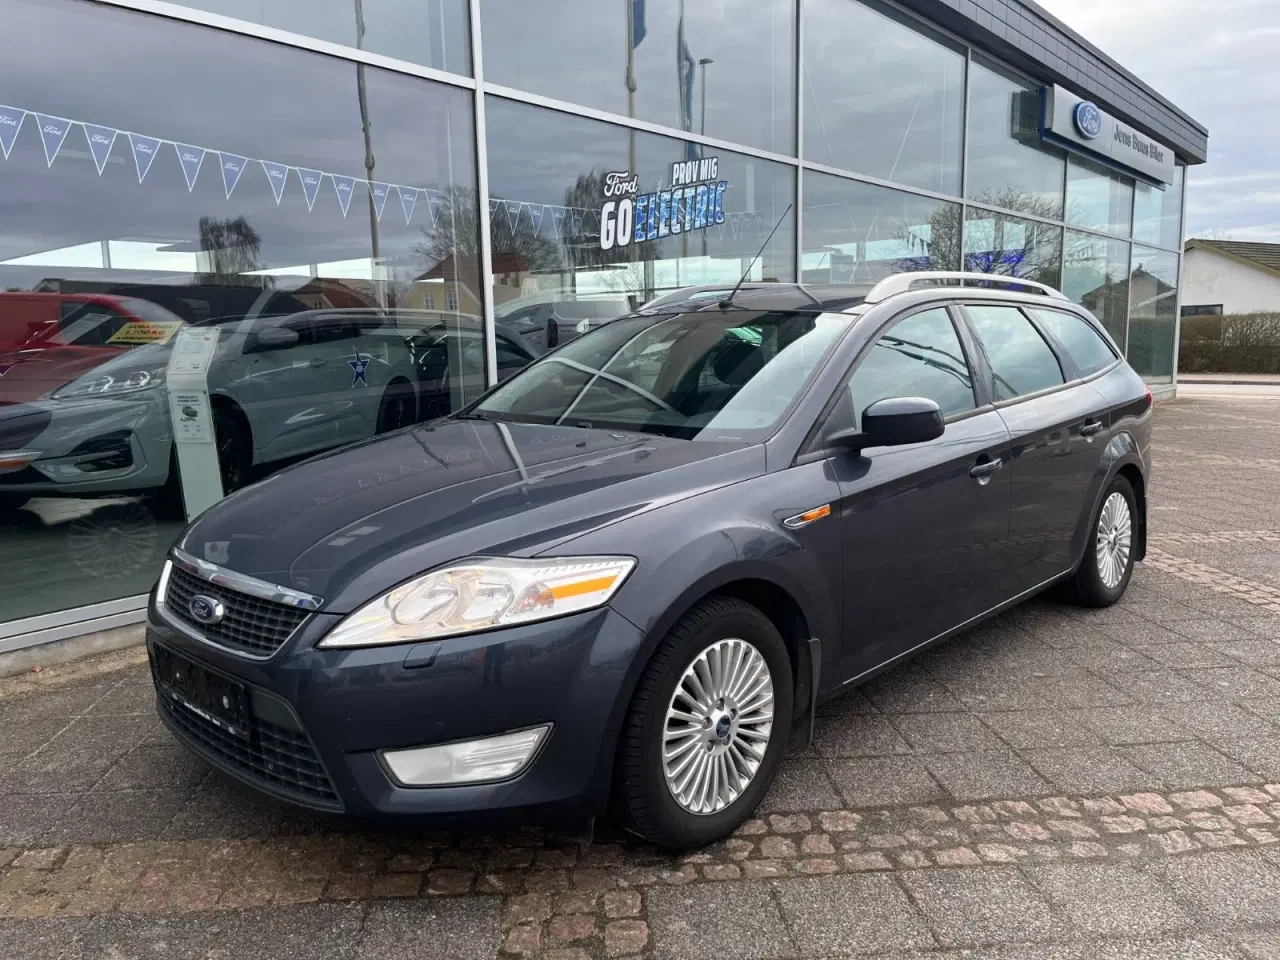 Billede 5 - Ford Mondeo 2,0 TDCi 115 ECOnetic stc.